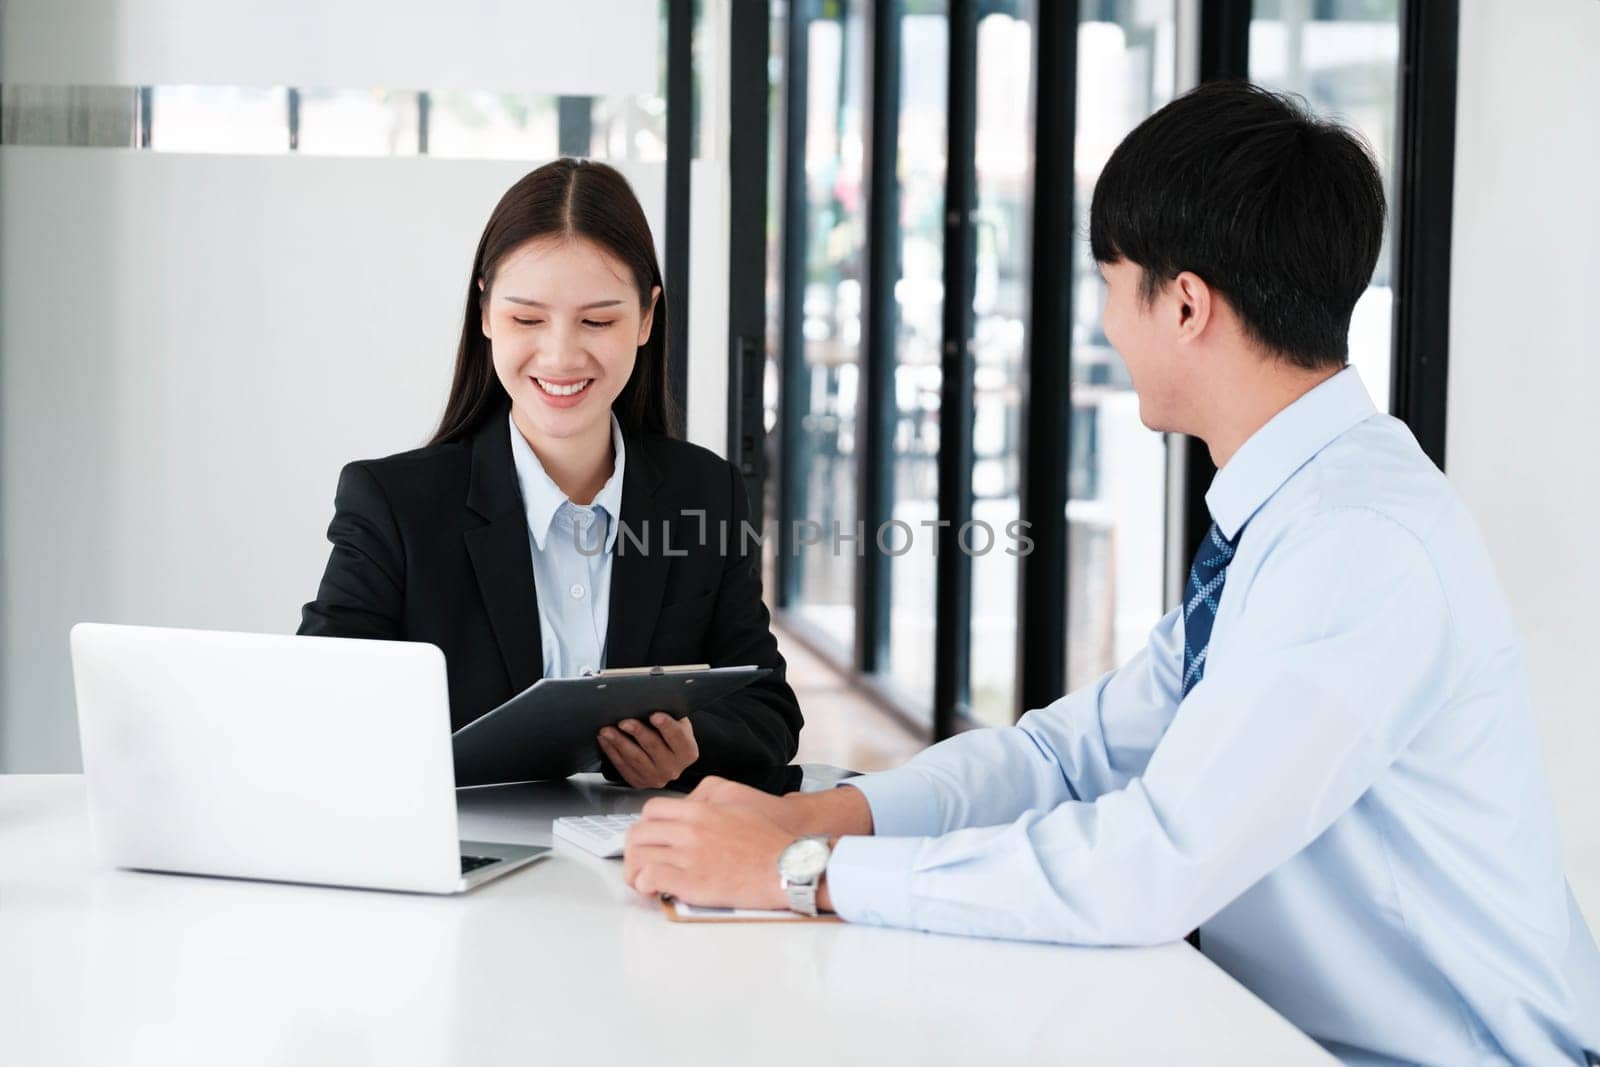 A candidate engaged in a job interview with a hiring manager, discussing qualifications and employment opportunities.